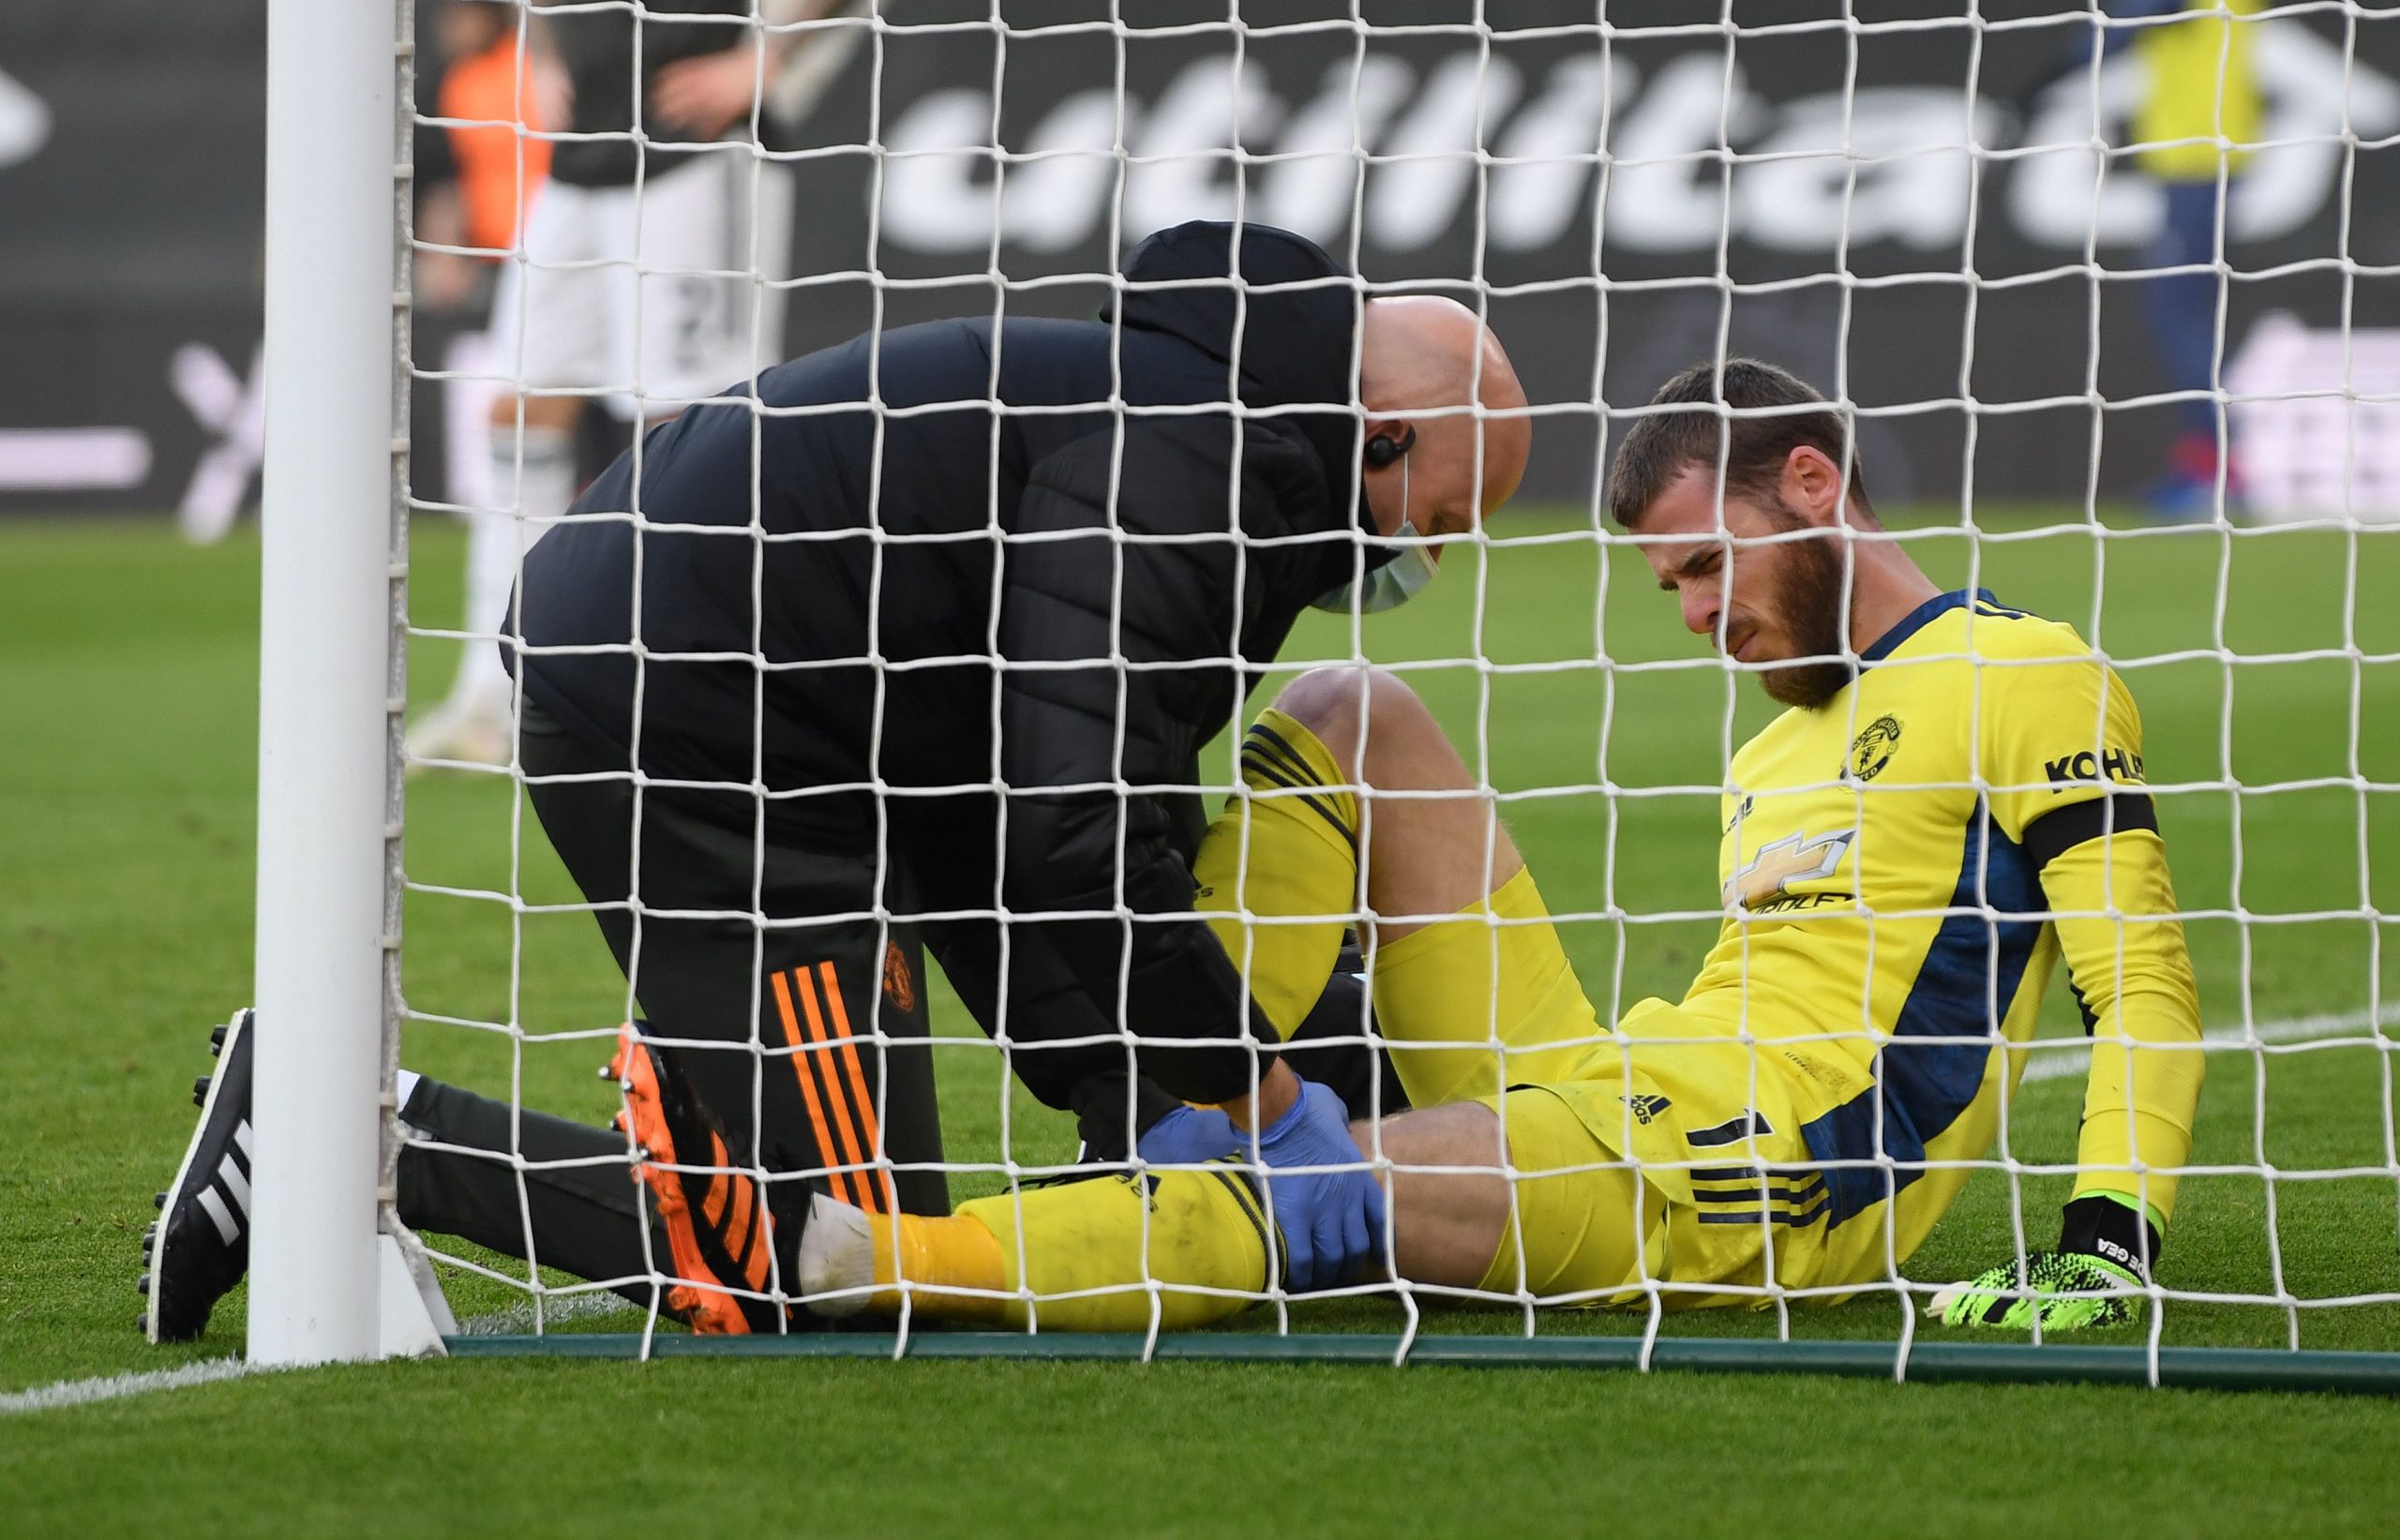 Manchester United goalkeeper David de Gea in pain after colliding with the goal-post in an attempt to save Ward-Prowse's free-kick. (GETTY Images)